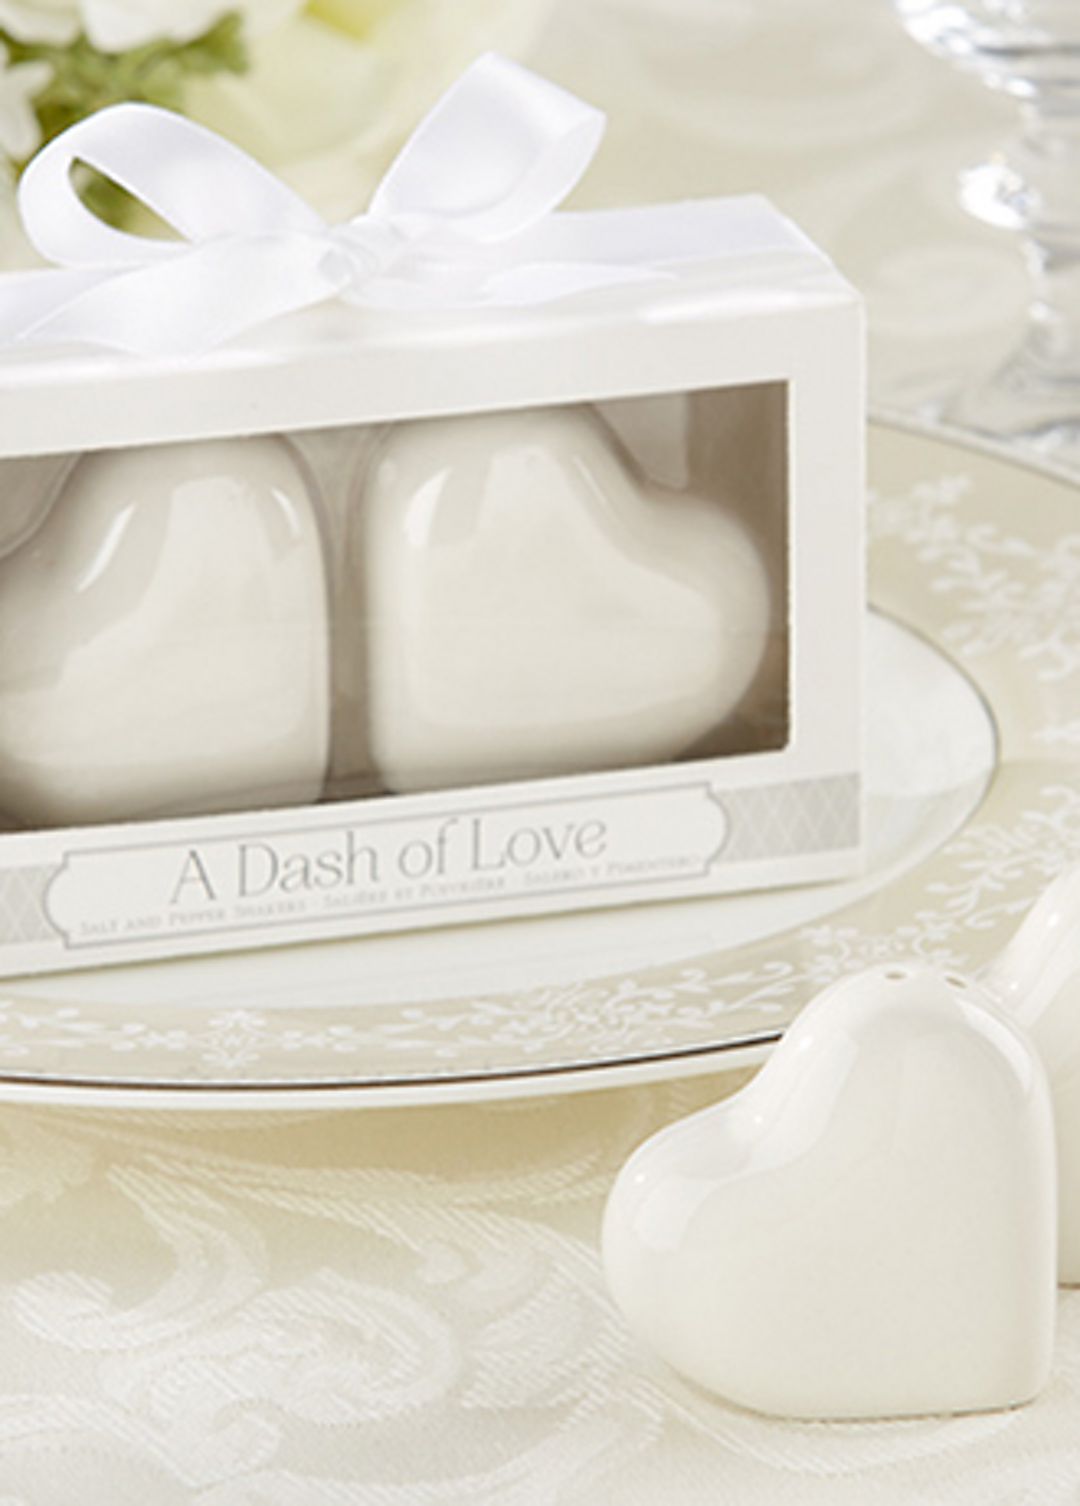 Dash of Love Salt and Pepper Shakers Set of 2 Image 1